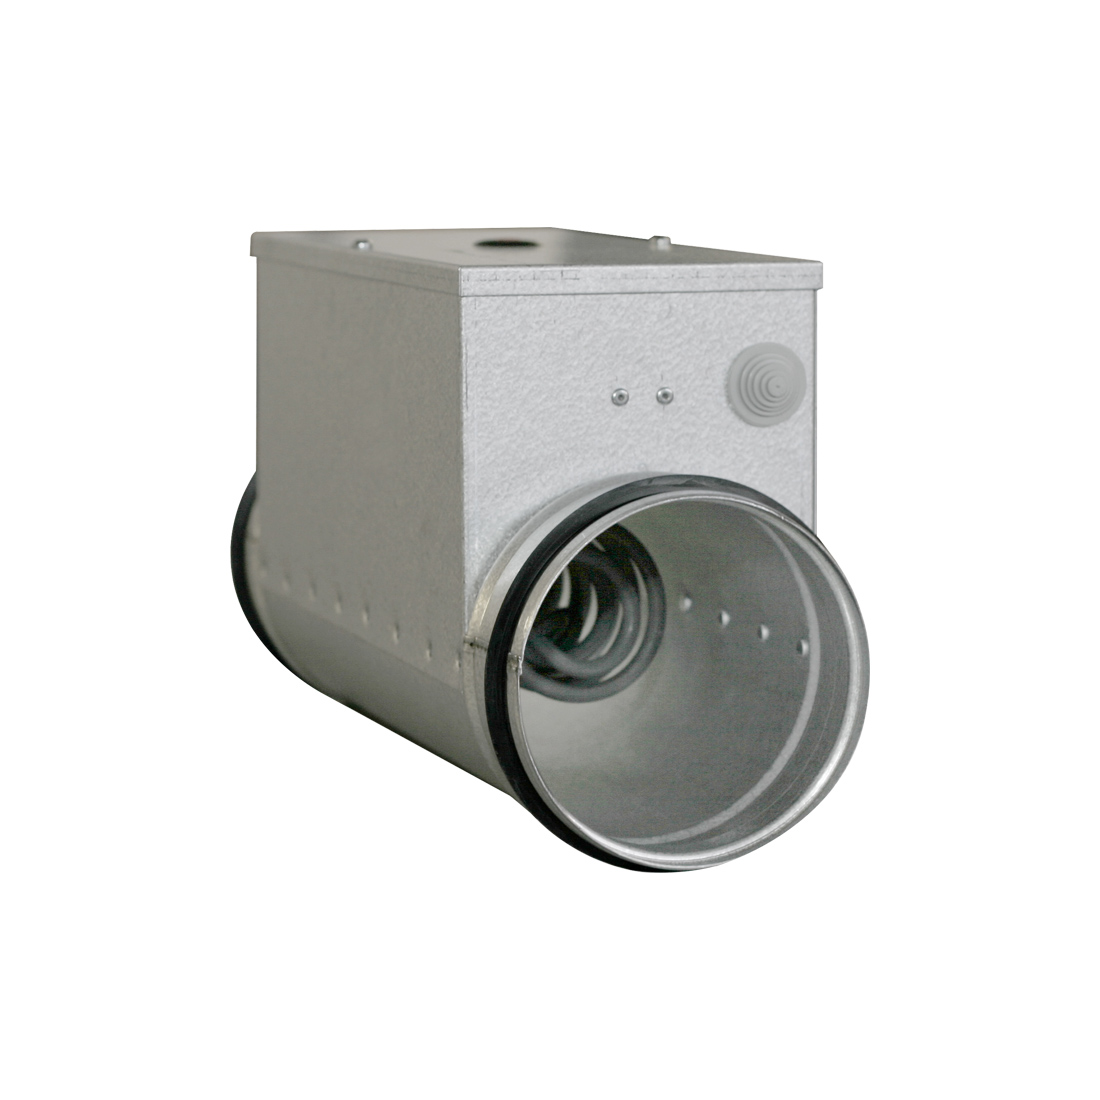 Vent-Matika Duct Mounted Electric Heater